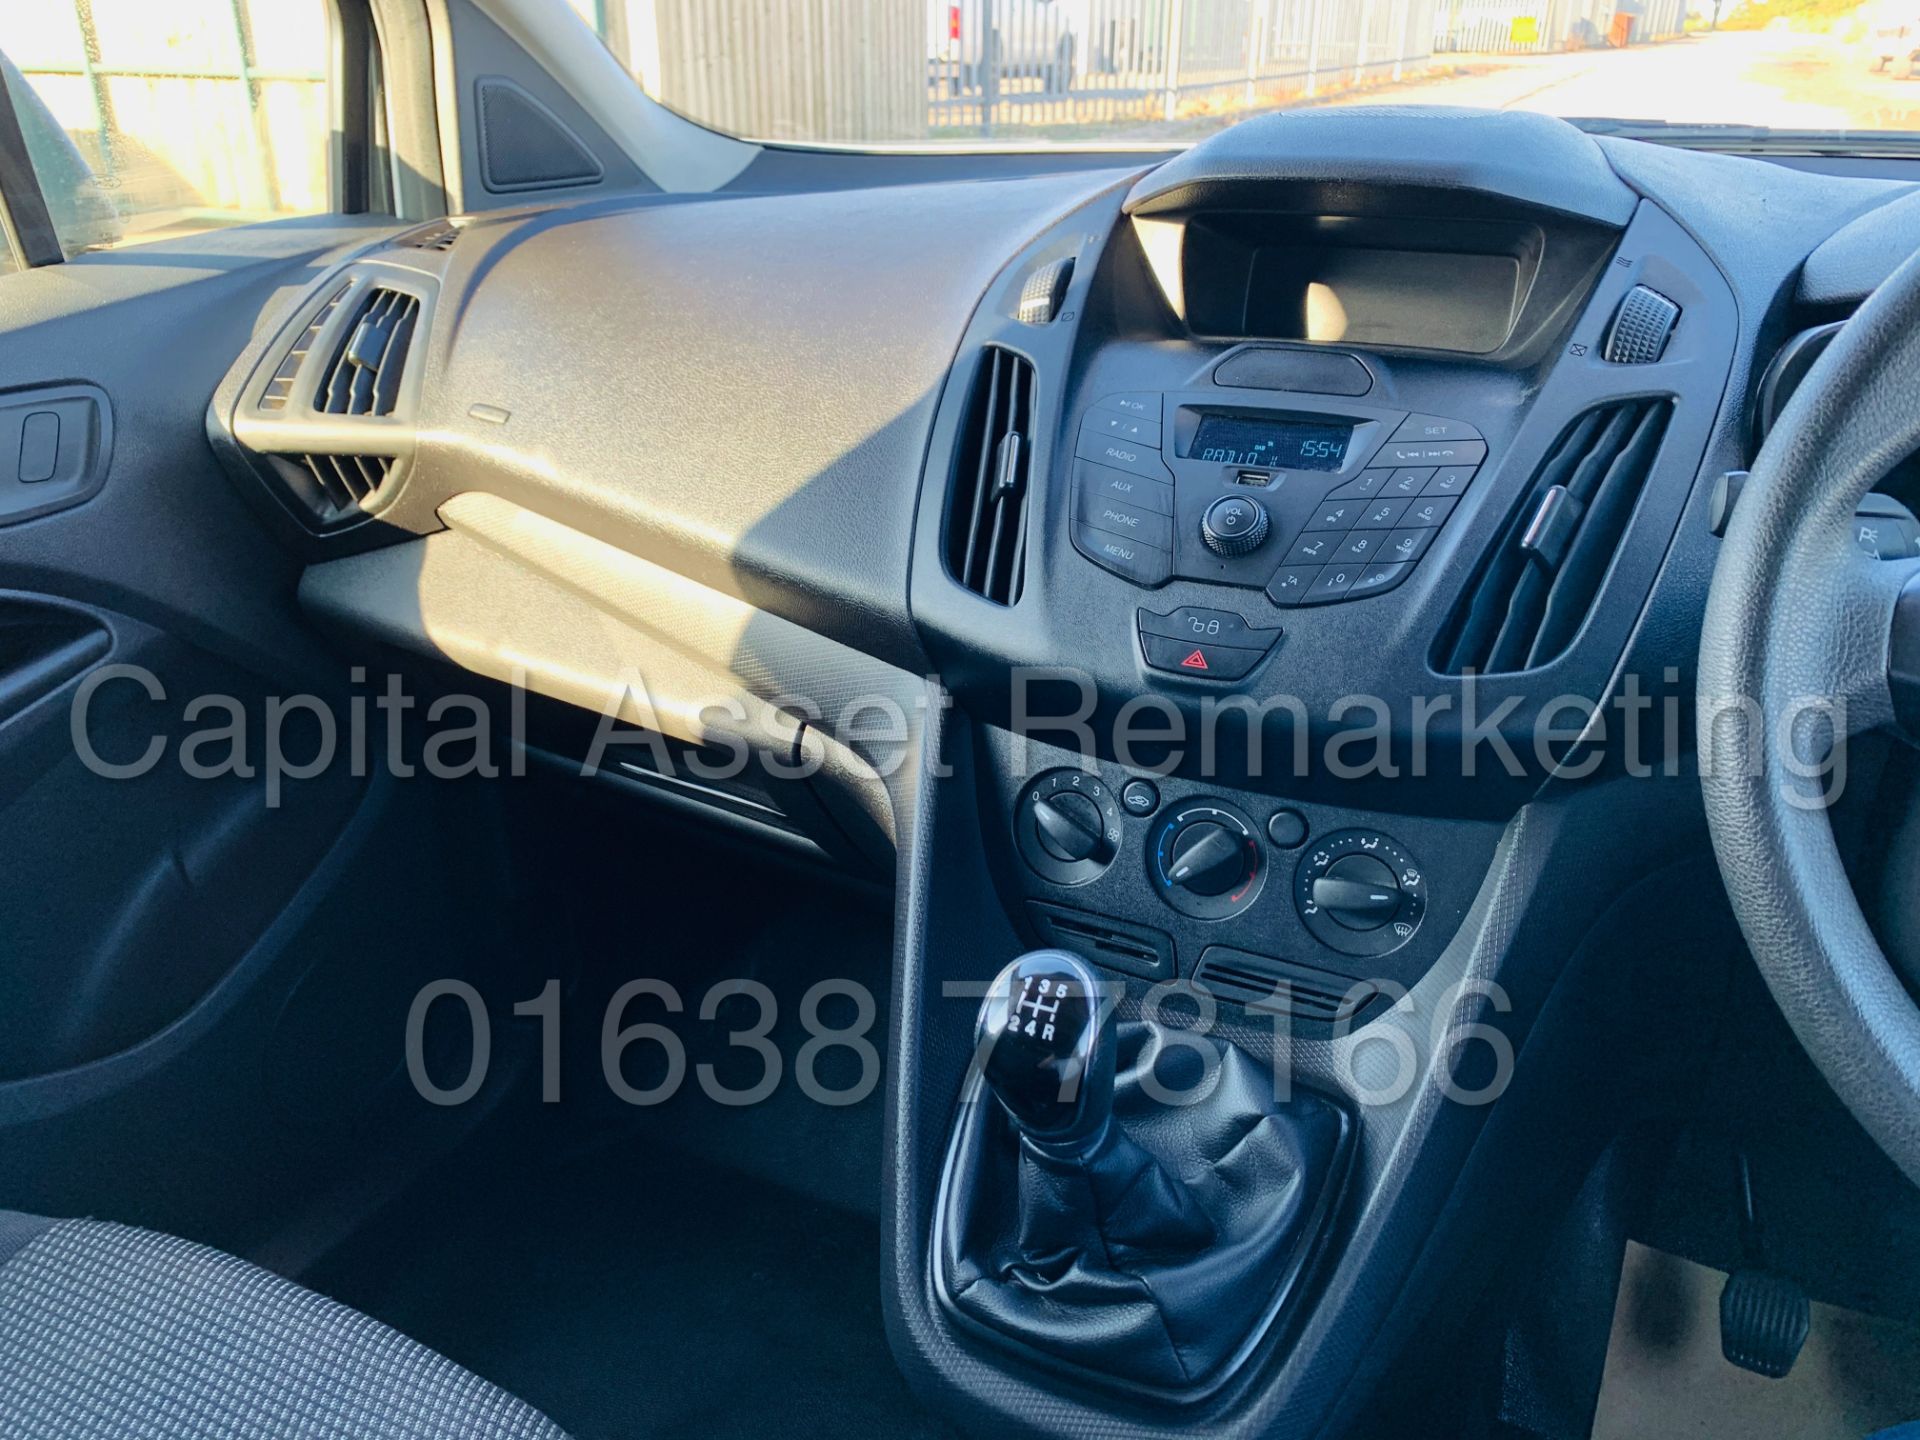 FORD TRANSIT CONNECT *SWB* (2018 - EURO 6) '1.5 TDCI - 6 SPEED' (1 OWNER) *U-LEZ COMPLIANT* - Image 31 of 37